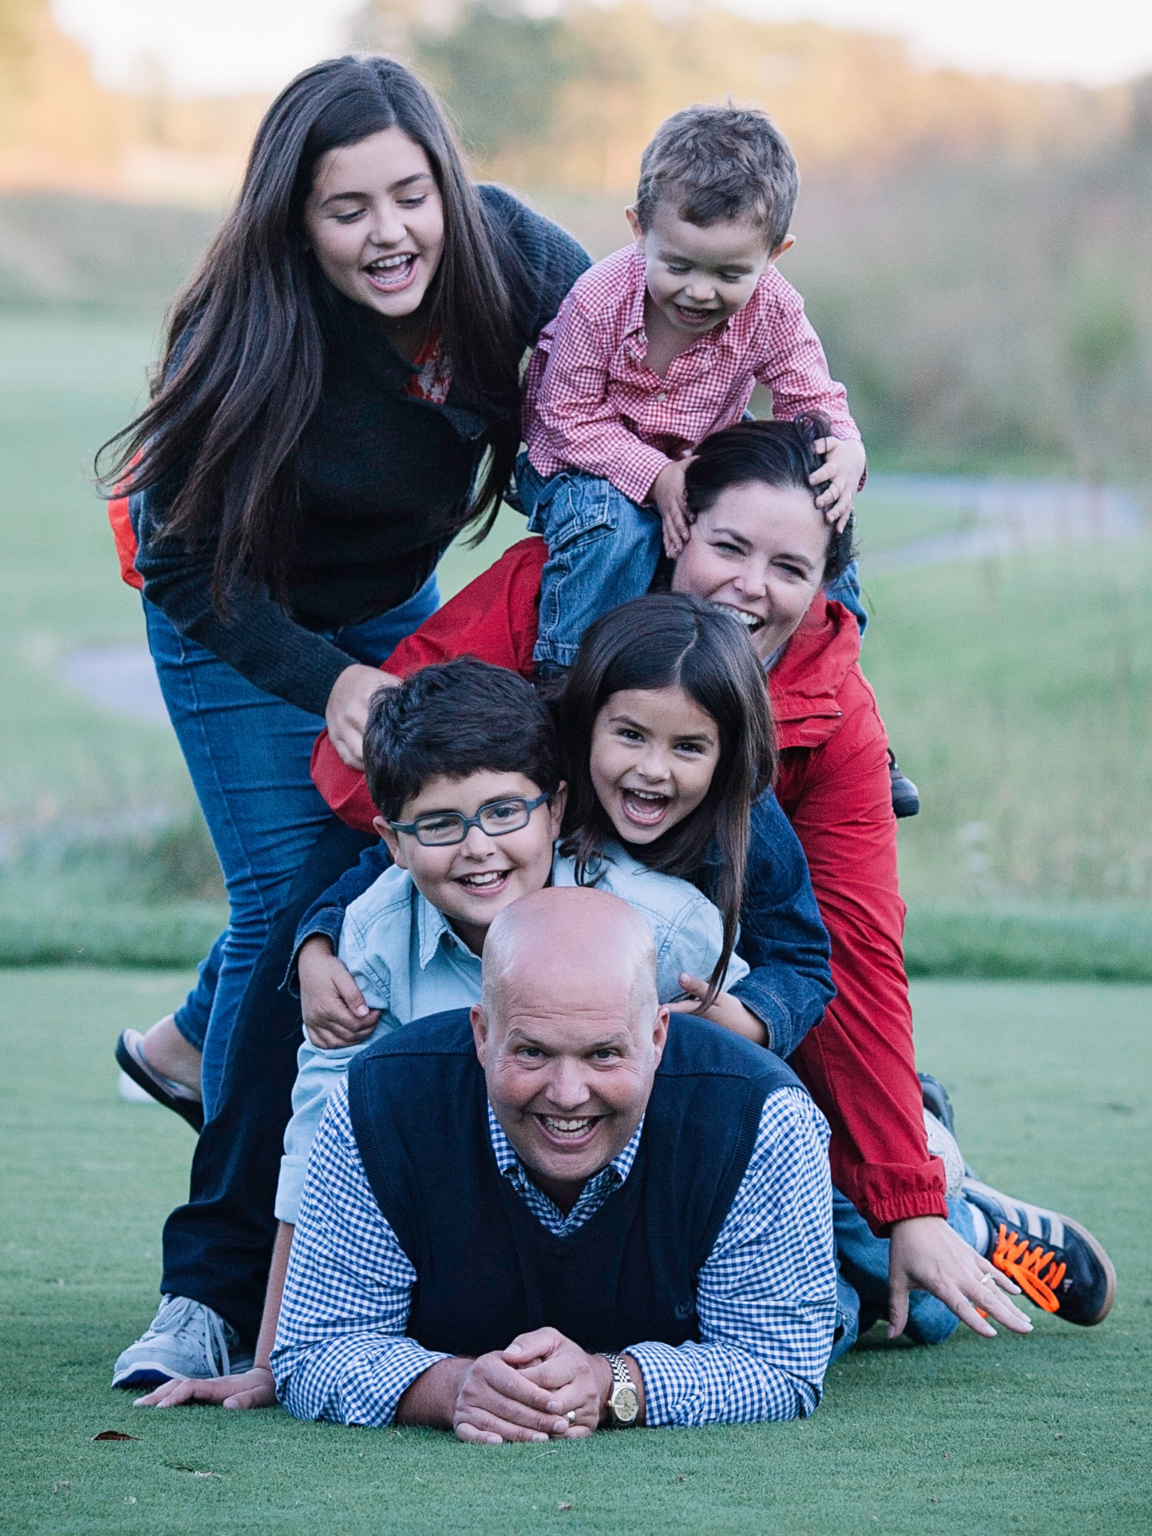 Dr. George and family in a tall pile with kids and Mrs. Bullard on top of his back, Dr. George on the bottom of the pile, all smiling at the camera